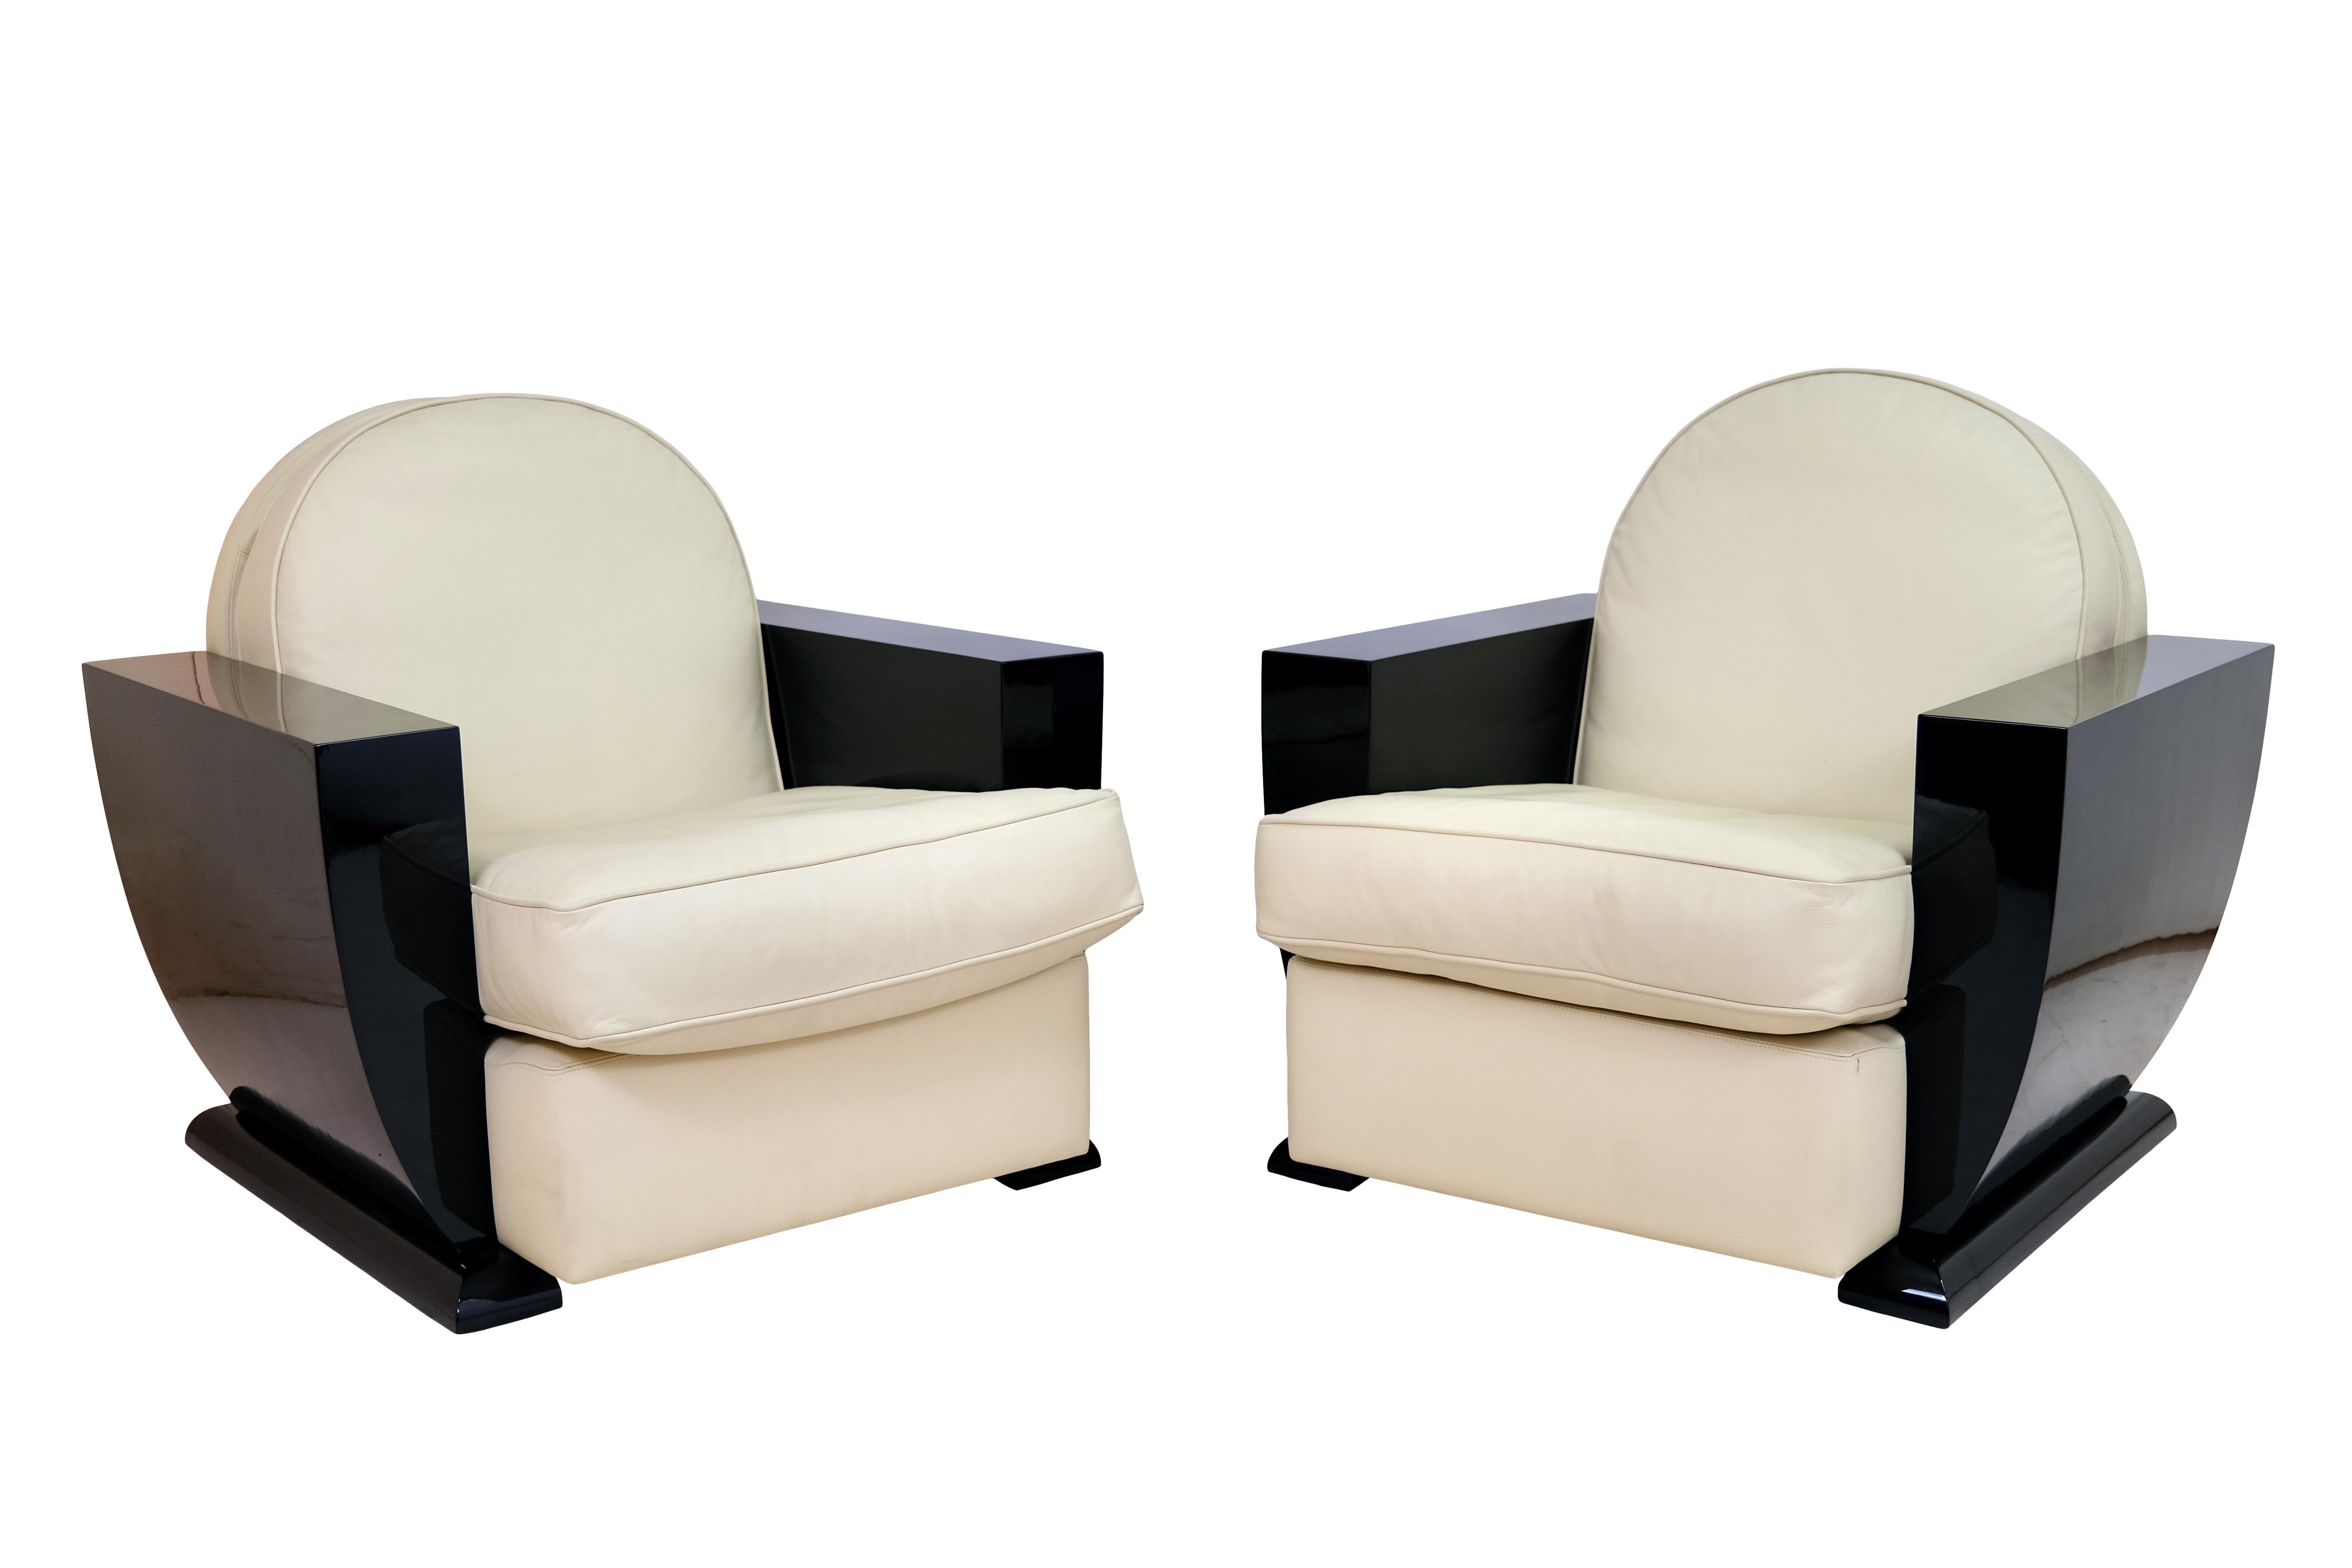 Pair of club chairs
piano lacquer, black high gloss
upholstery in beige leather

Original Art Deco, France 1930s

Dimensions:
Width: 84 cm
height: 80 cm
depth: 100 cm
Seat height: 40 cm